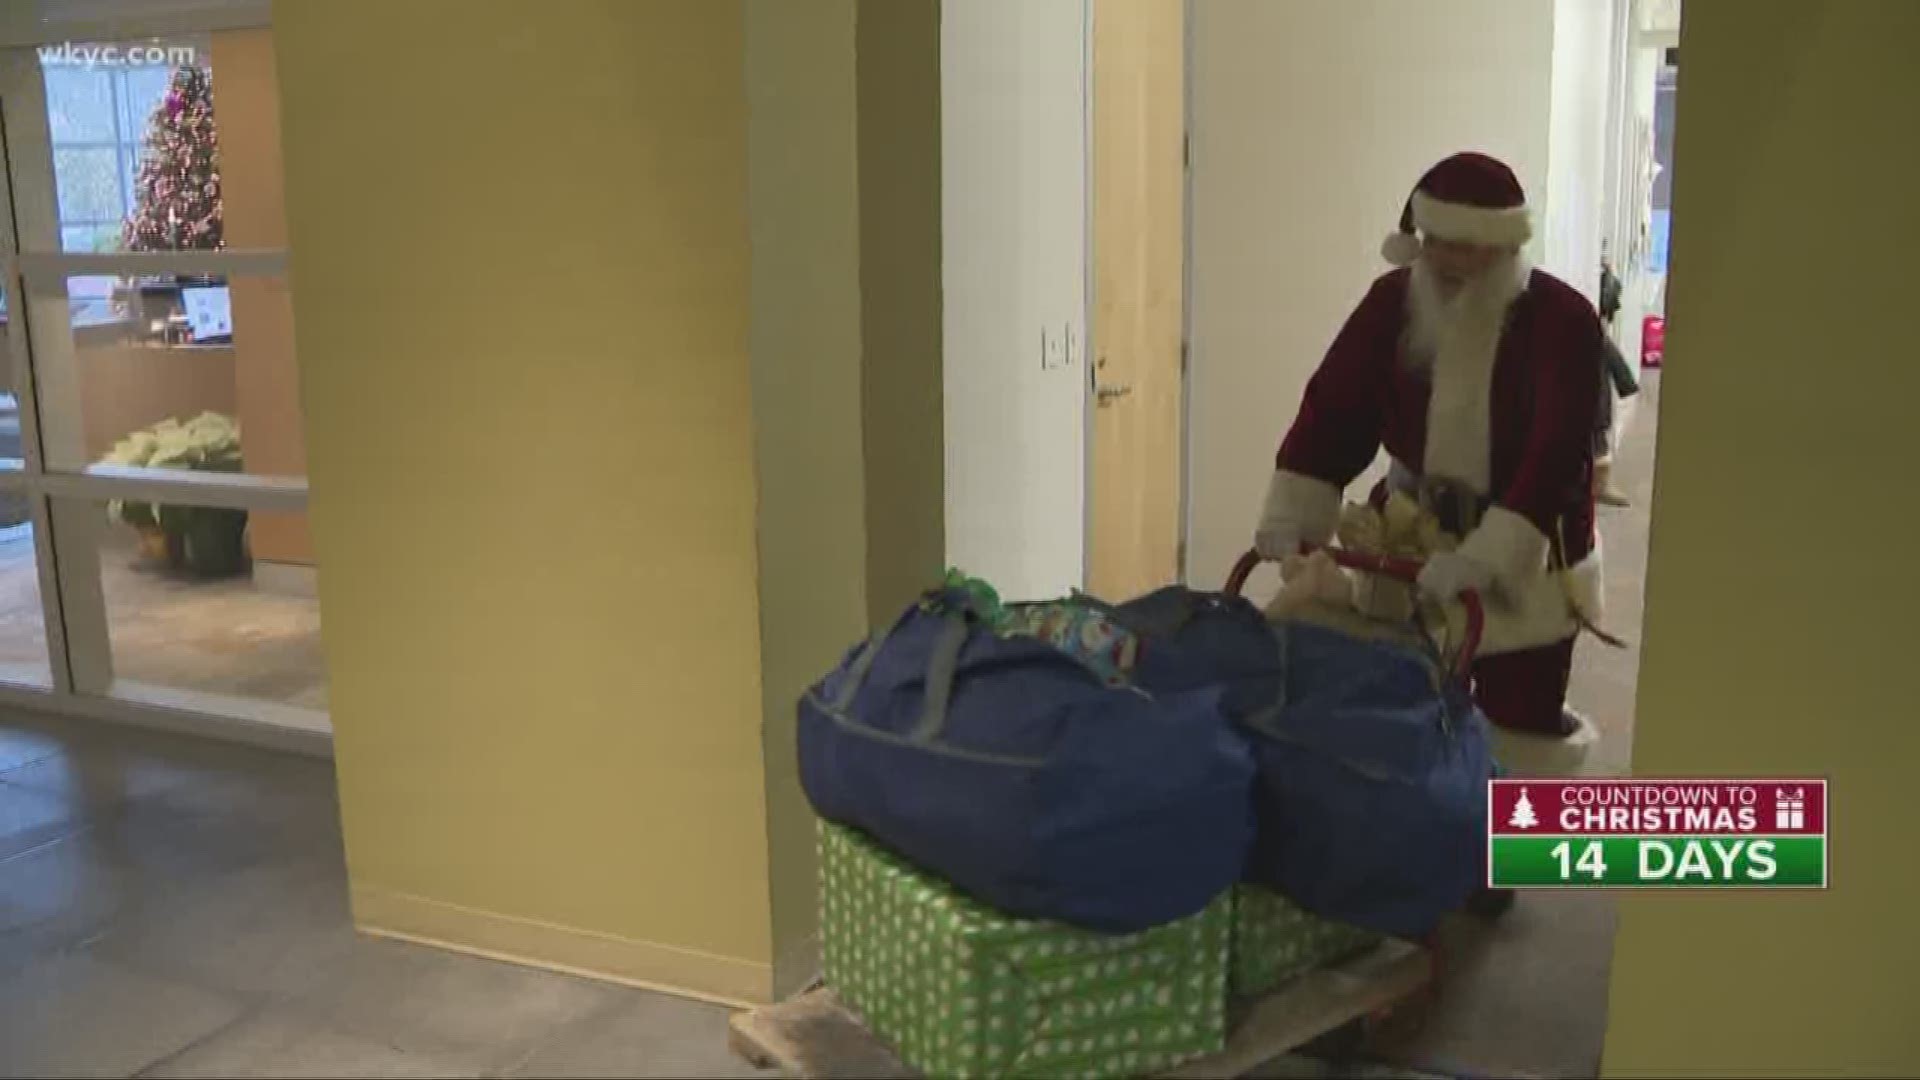 WKYC teams up with Fostering Hope to deliver gifts to children living in foster care